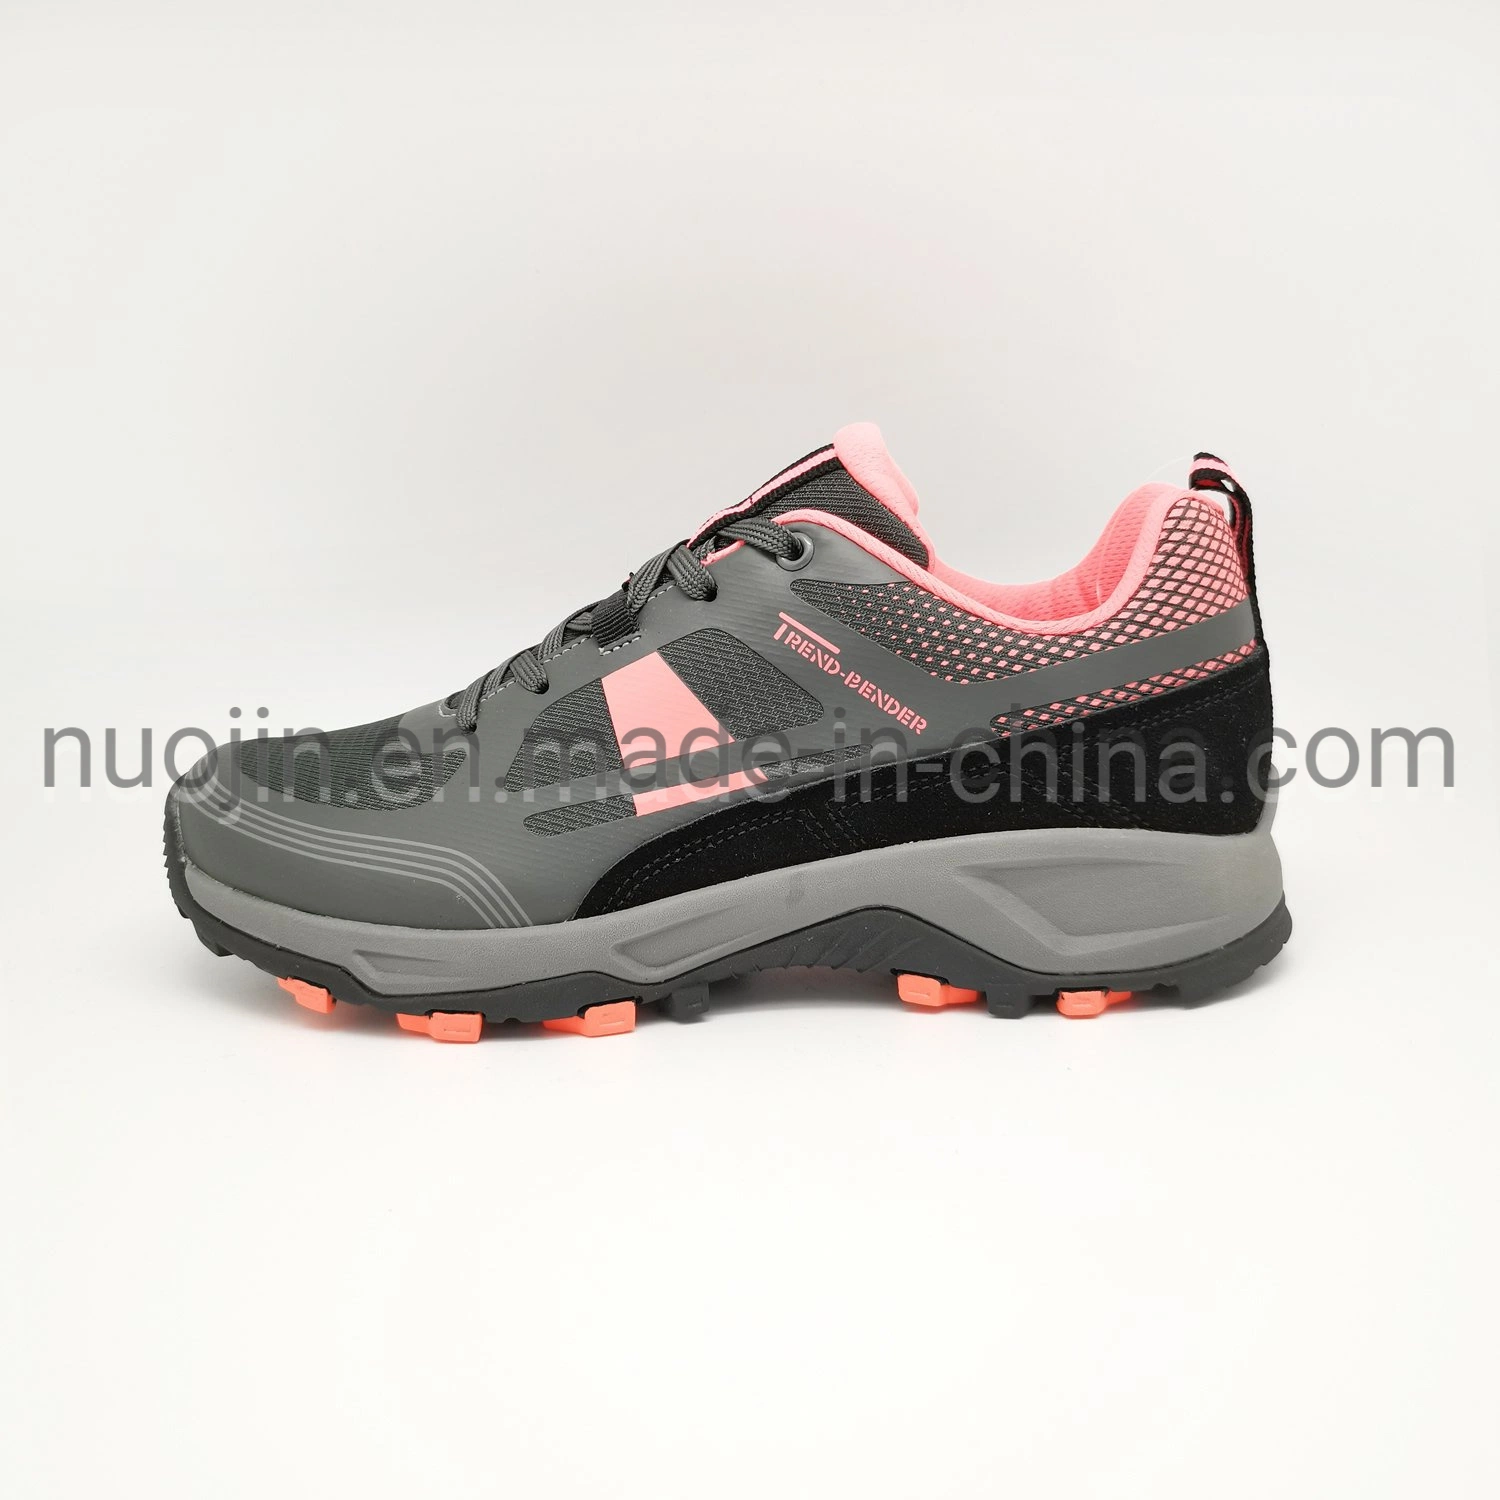 High-Top Men Gender Hiking Outdoor Shoes Casual Sports Shoes